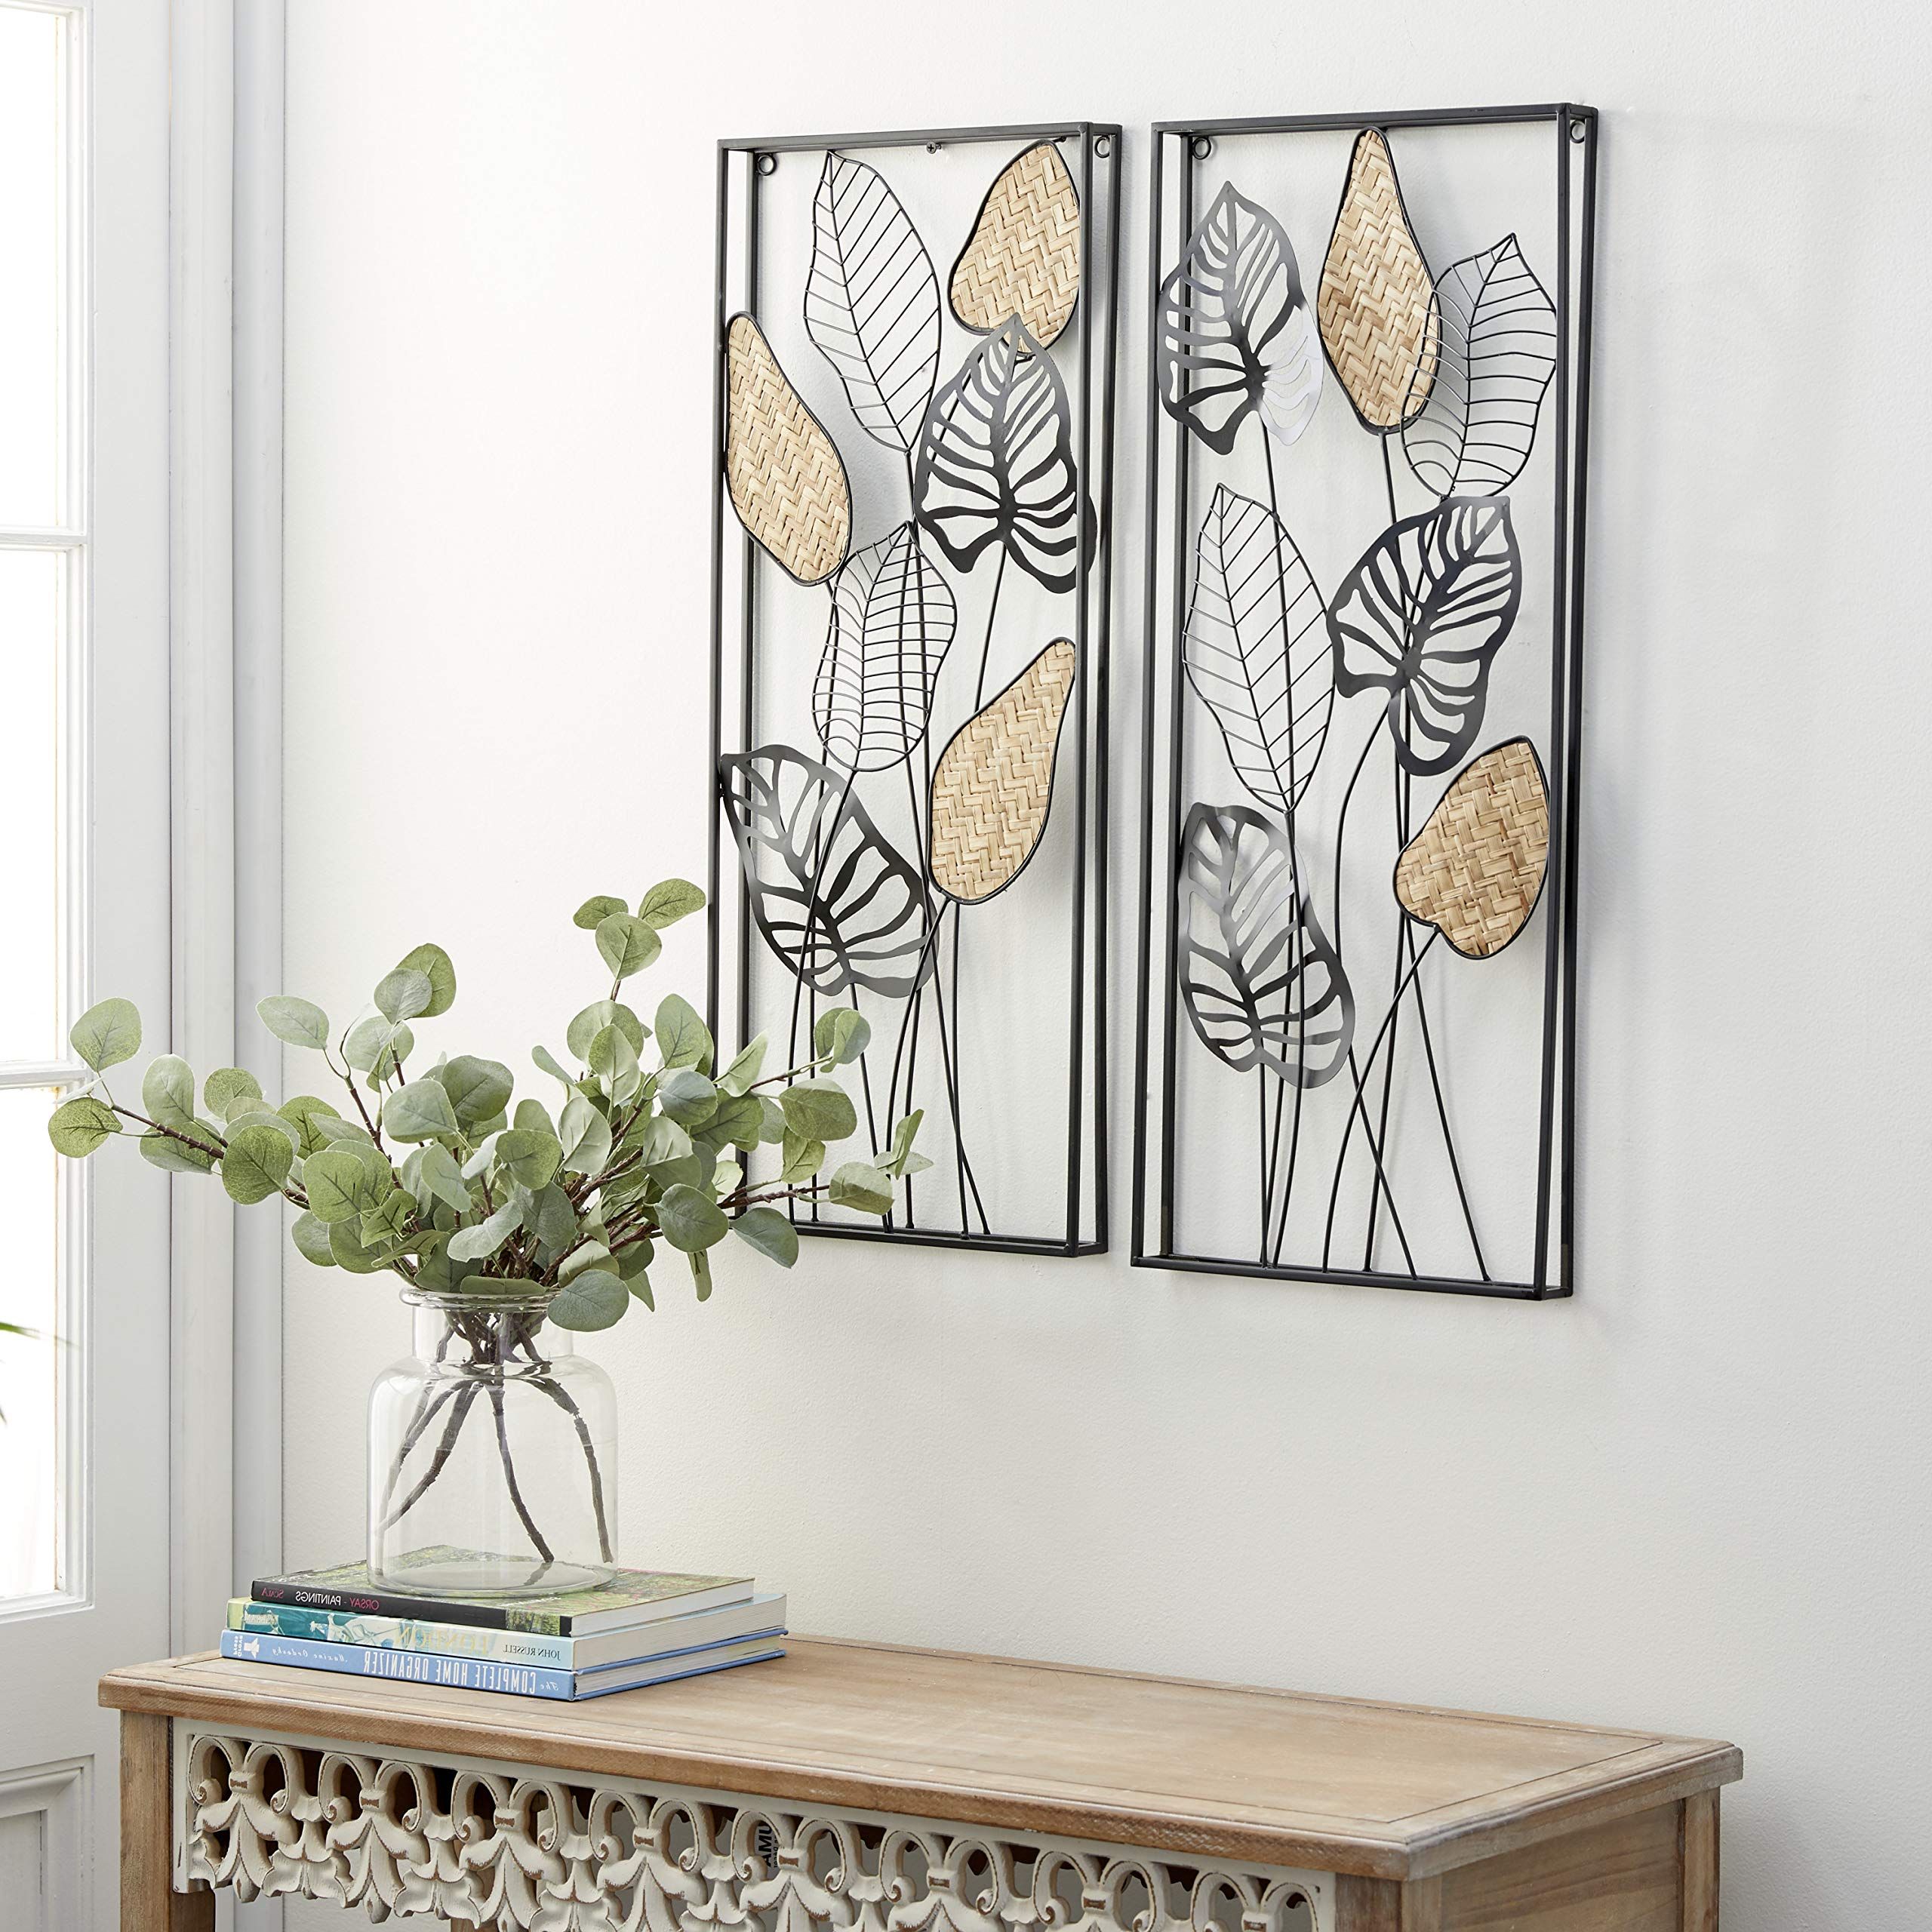 Intricate Laser Cut Wall Art Pertaining To Most Current Amazon: Deco 79 Metal Leaf Tall Cut Out Wall Decor With Intricate Laser  Cut Designs, Set Of 2 12"w, 30"h, Black : Home & Kitchen (Photo 1 of 15)